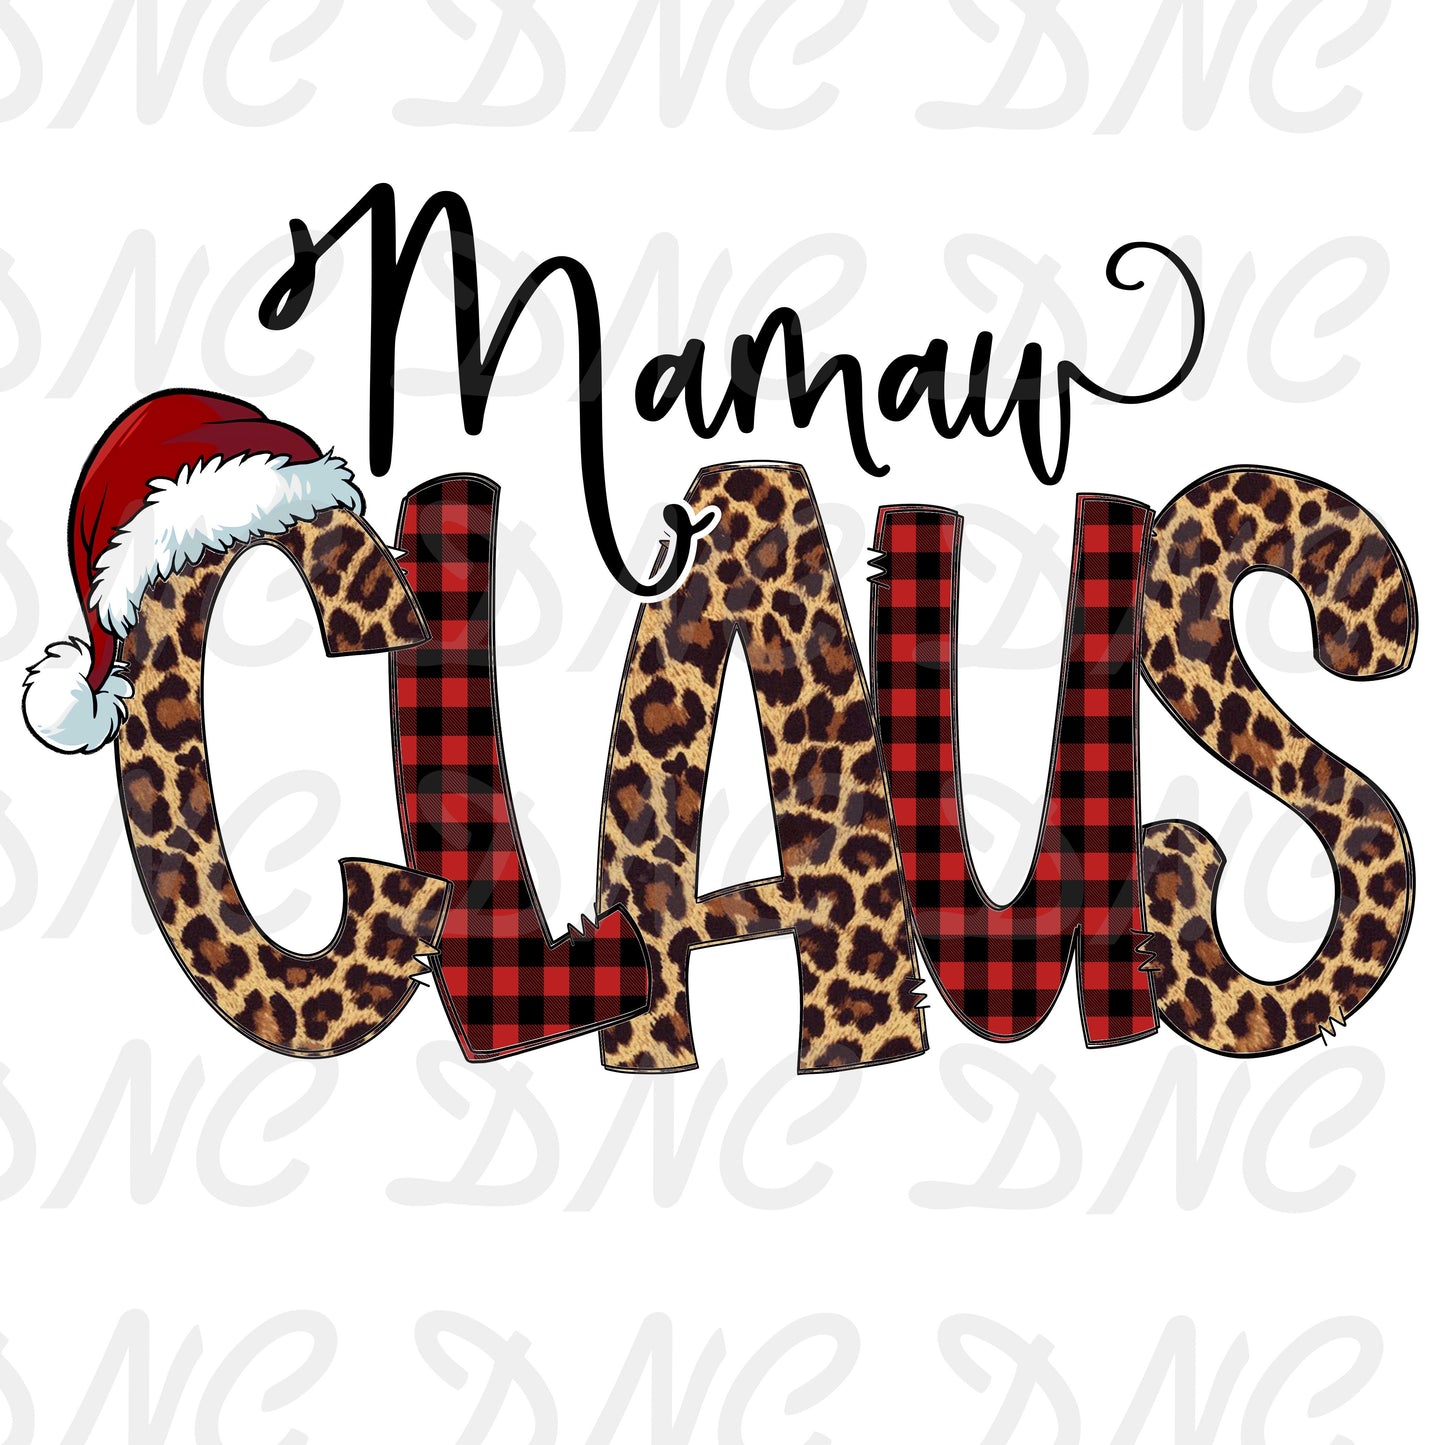 Mamaw claus - Sublimation